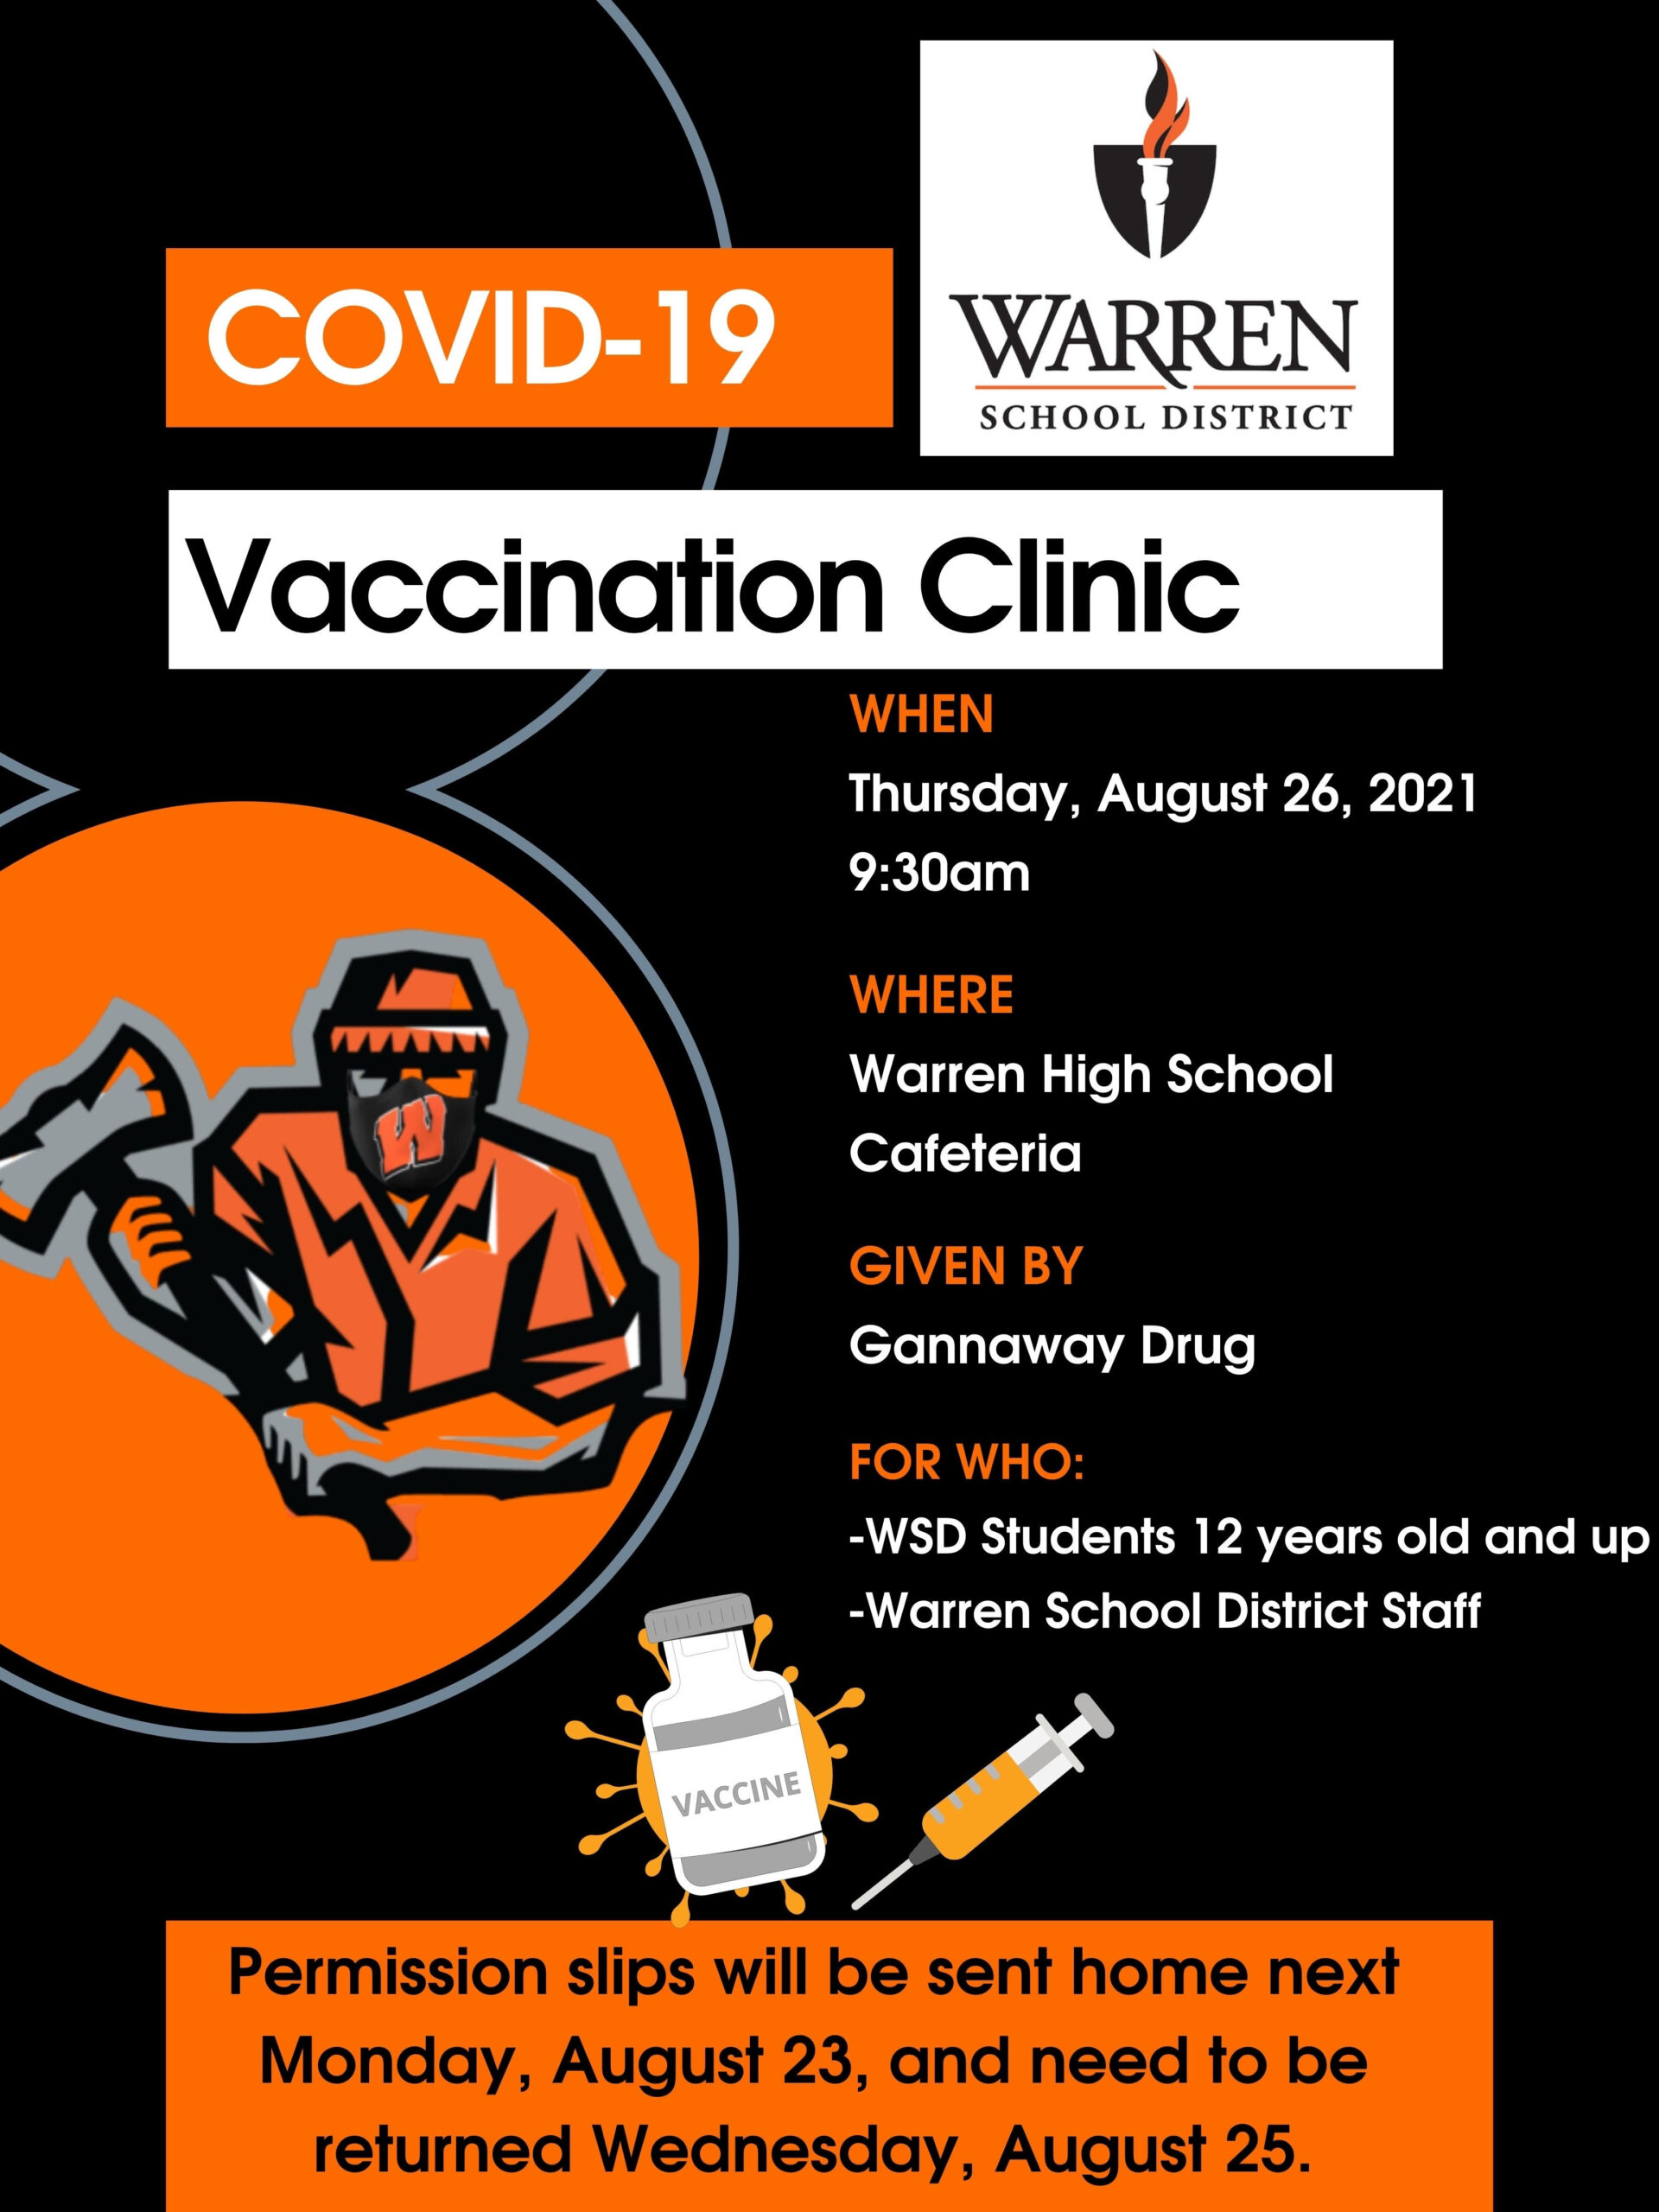 COVID vaccination clinic scheduled for August 26 for WSD eligible students and staff